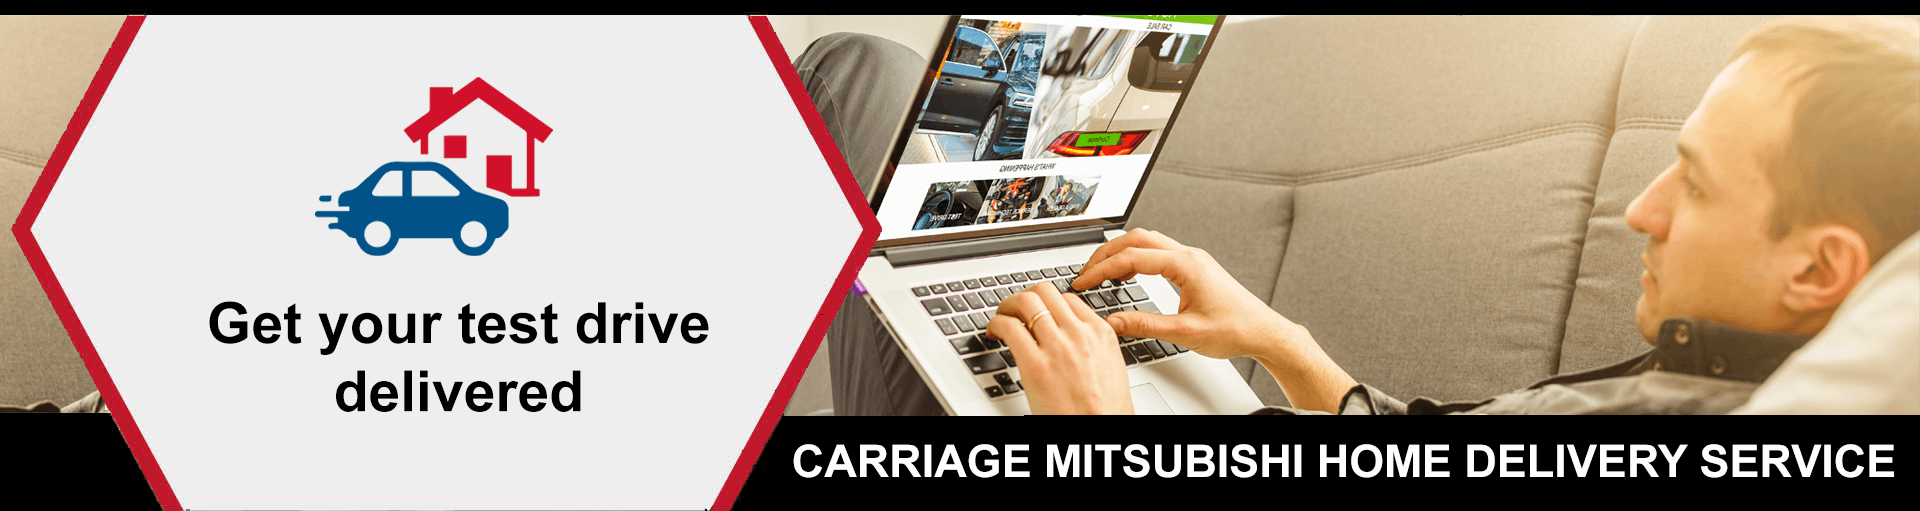 Carriage Mitsubishi Home Delivery